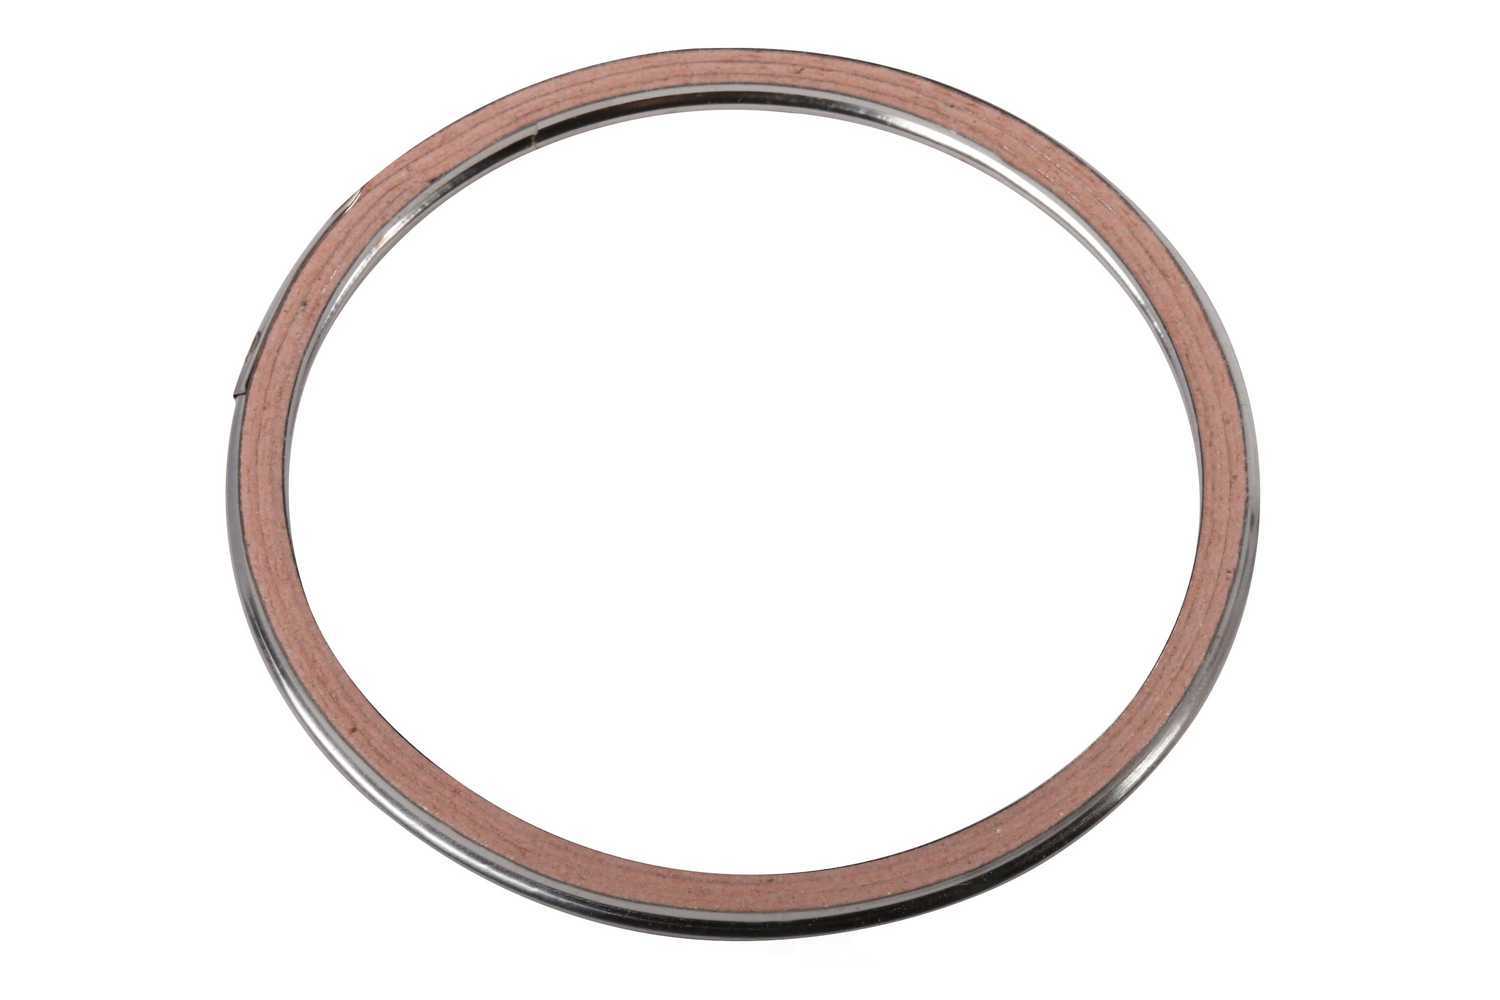 GM GENUINE PARTS - Catalytic Converter Gasket - GMP 12672379